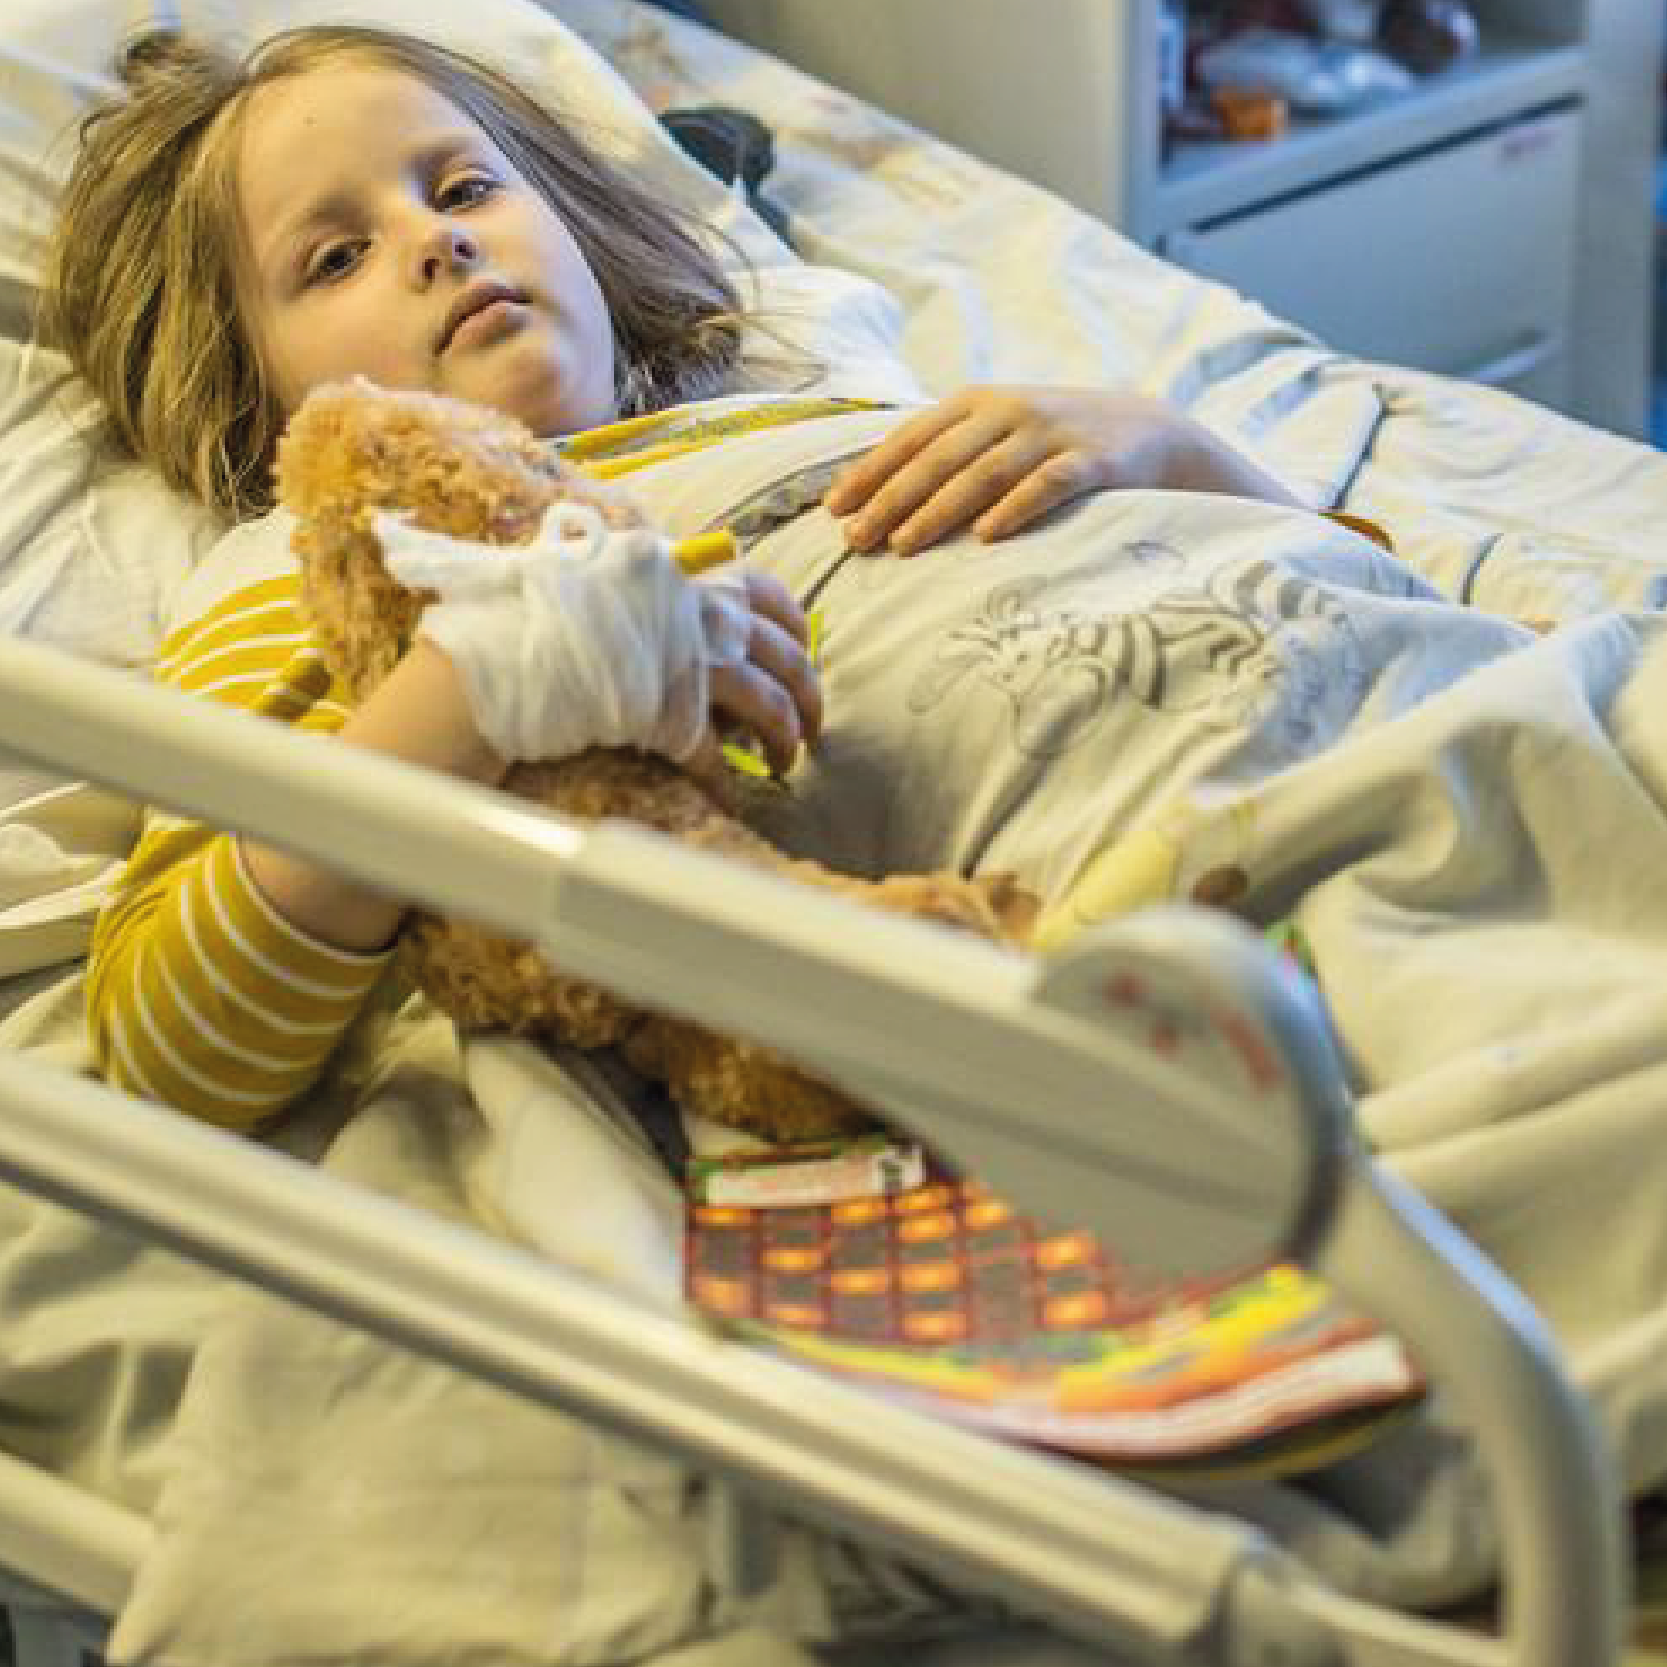 Shelling killed six-year-old Milana's mother. She is now recovering after surgery at a children's hospital in Kyiv, Ukraine.